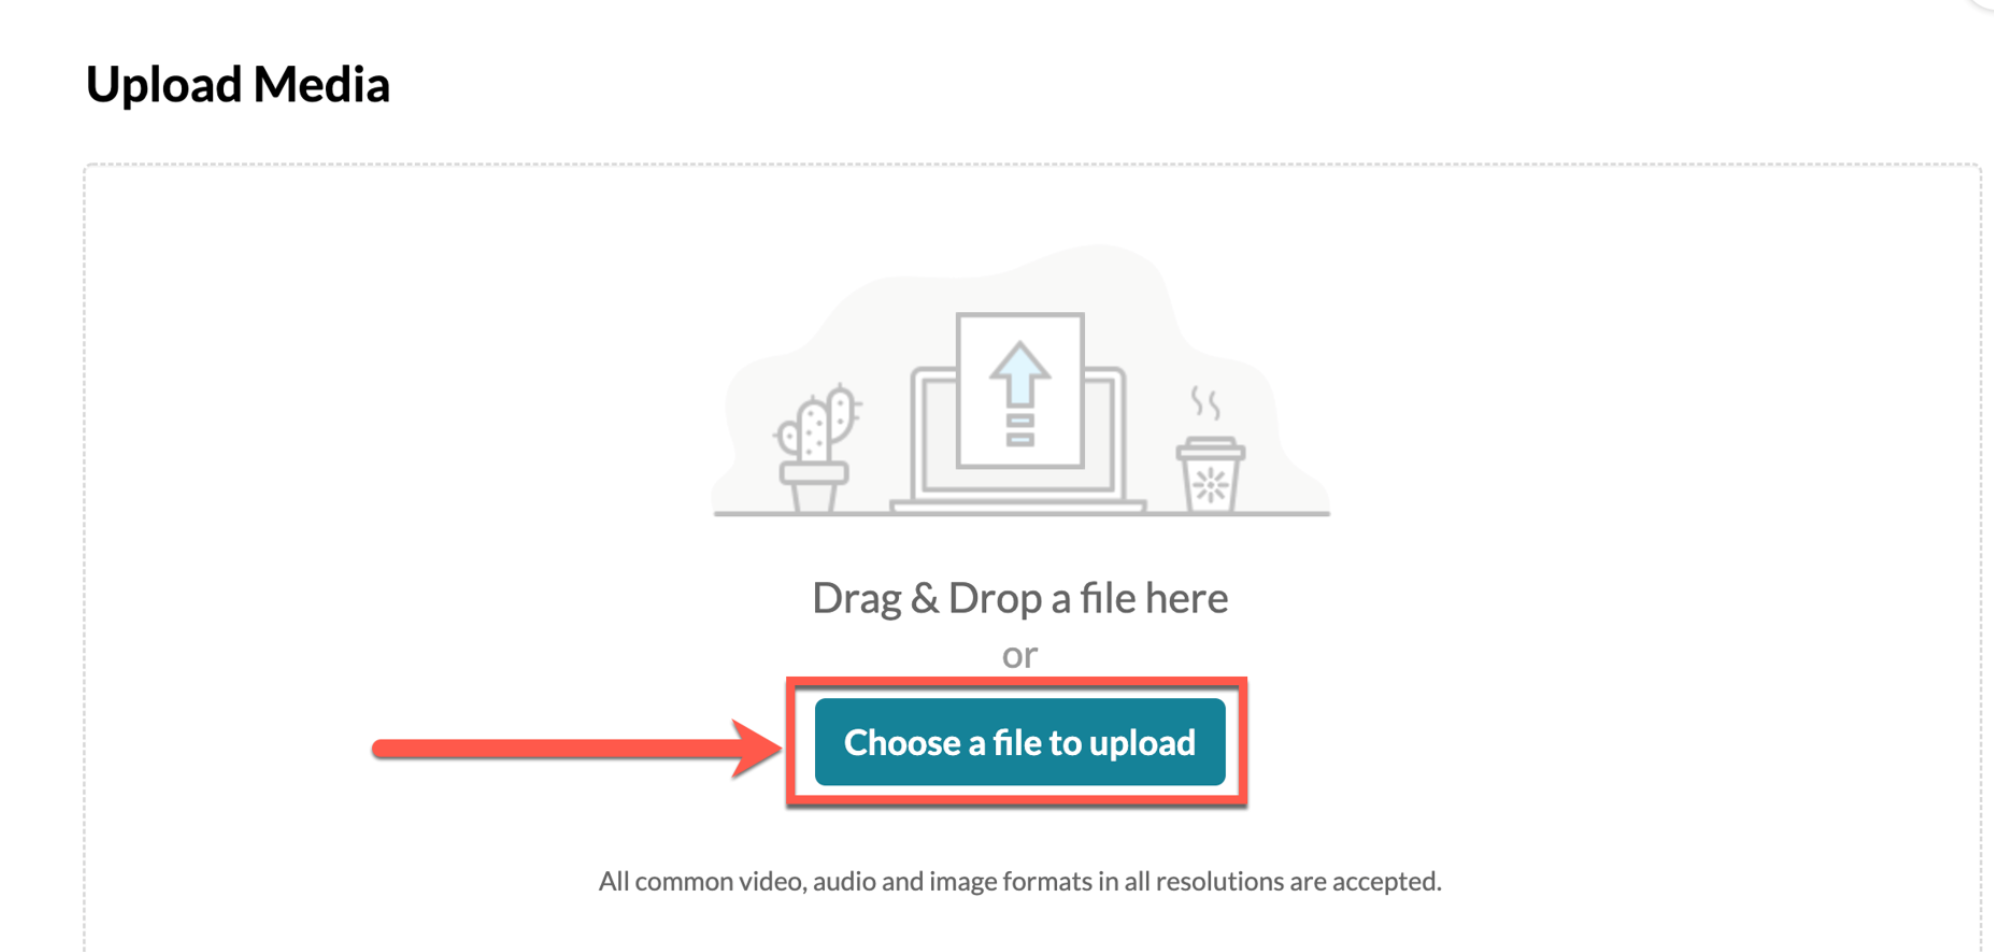 A screenshot showing how to Choose a file to upload the video